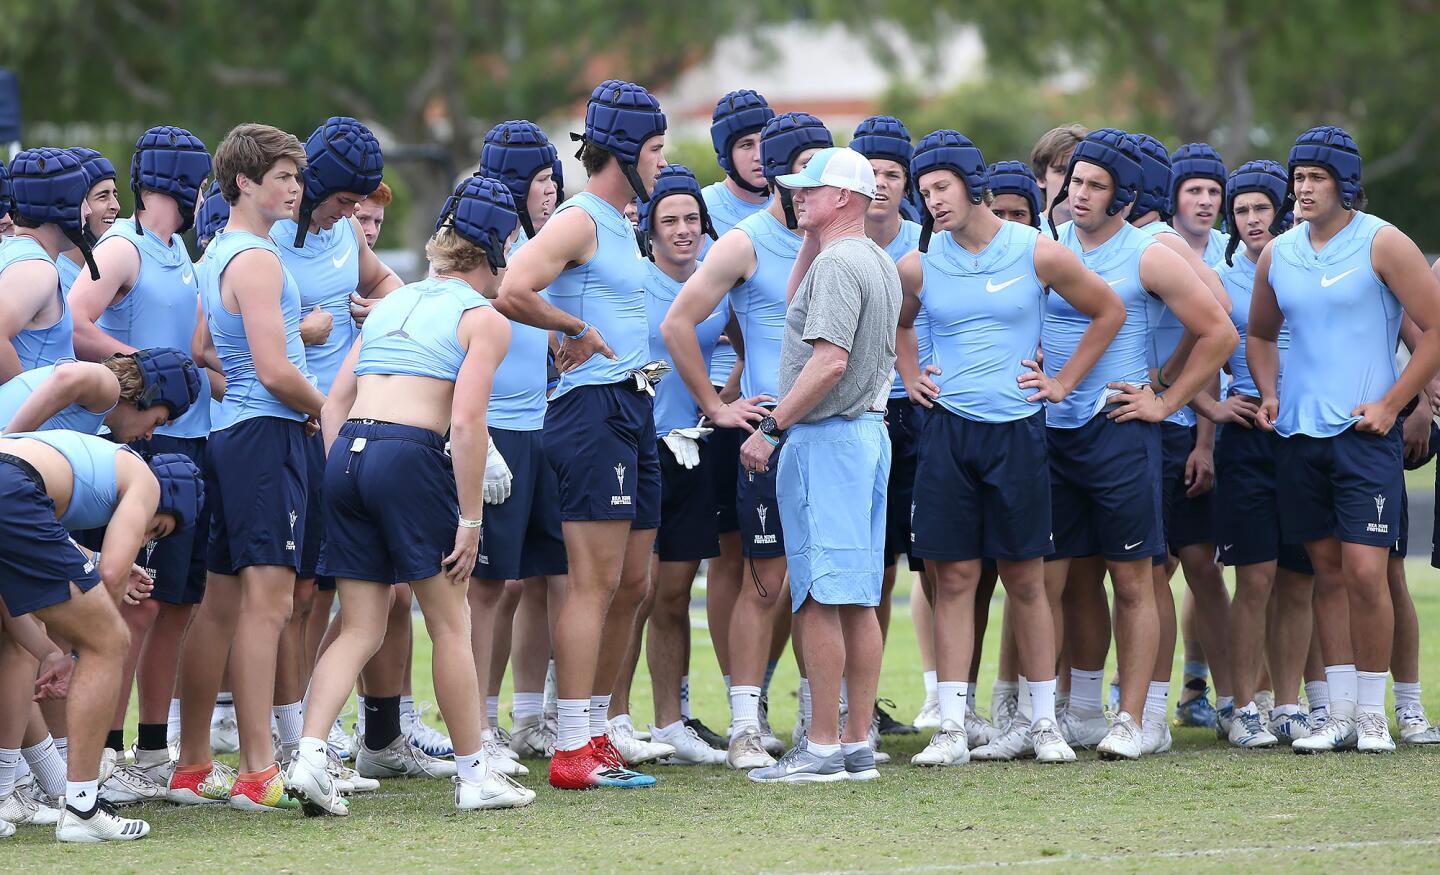 Head coach Dan O'Shea gathers players before a water break during a spring football showcase at Corona del Mar High on Wednesday.